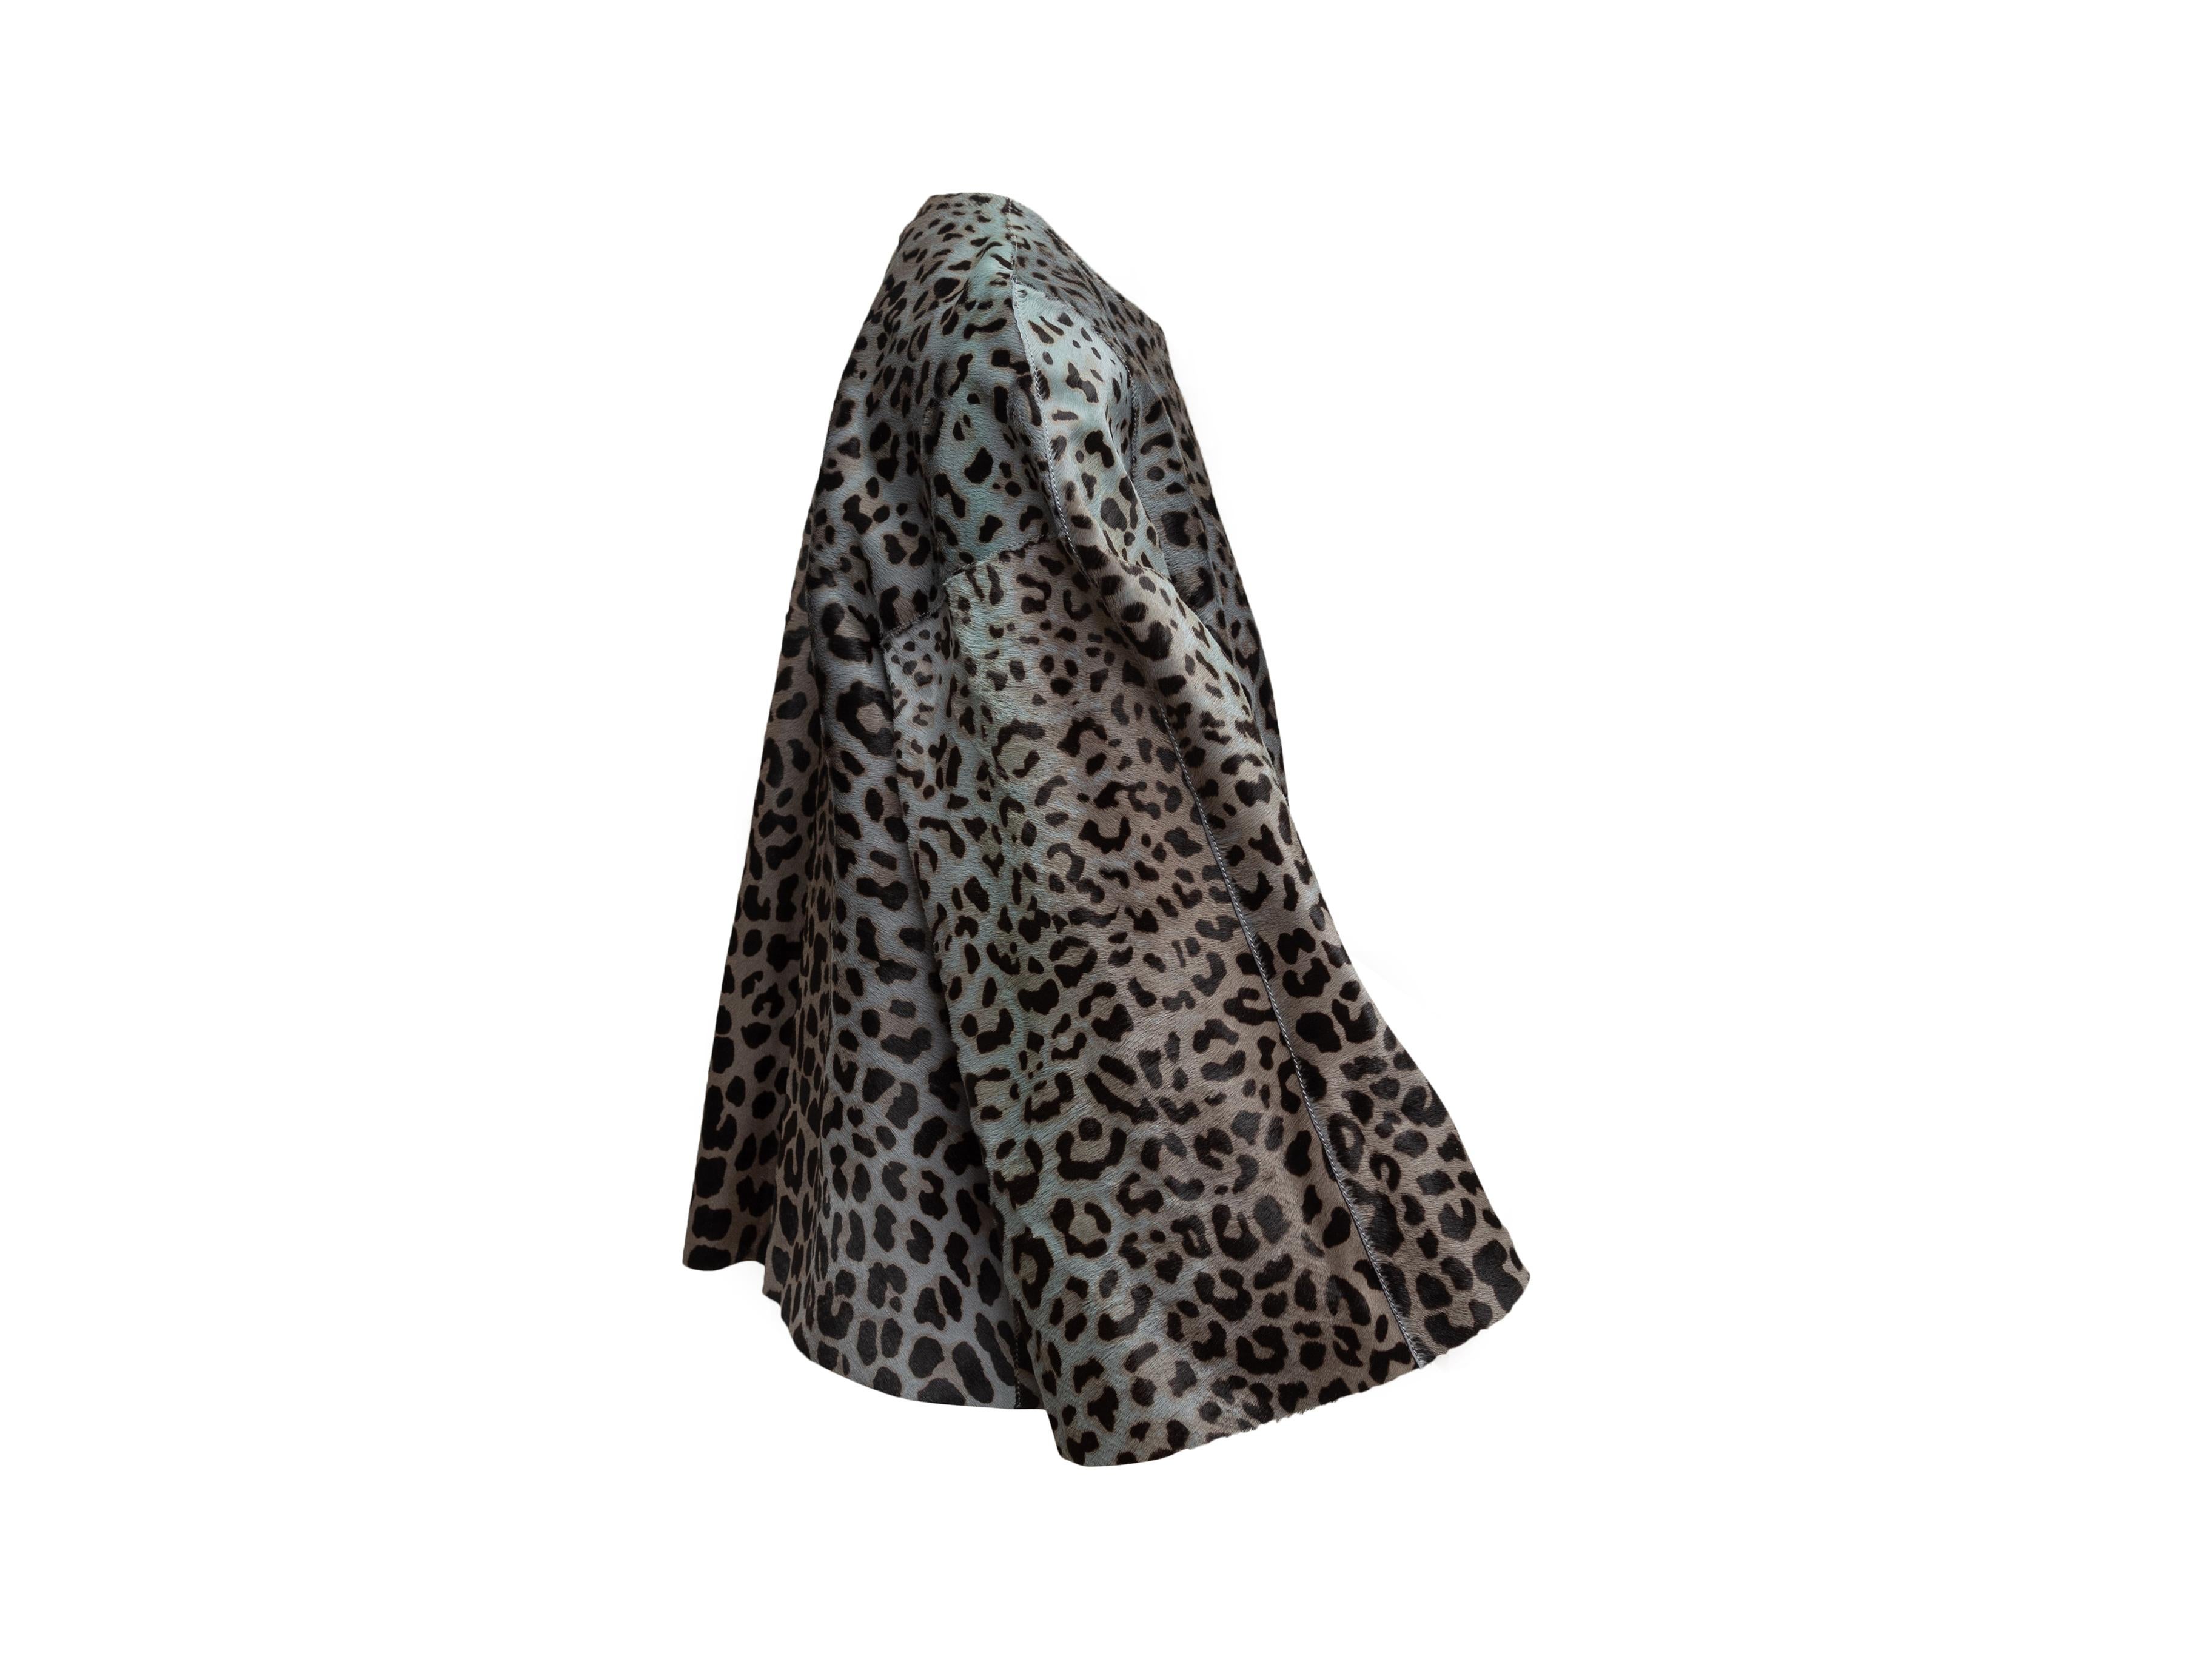 Product details: Light blue, black and tan ponyhair jacket by Giorgio Armani. Leopard print throughout. Crew neck. Concealed closures at front. 39